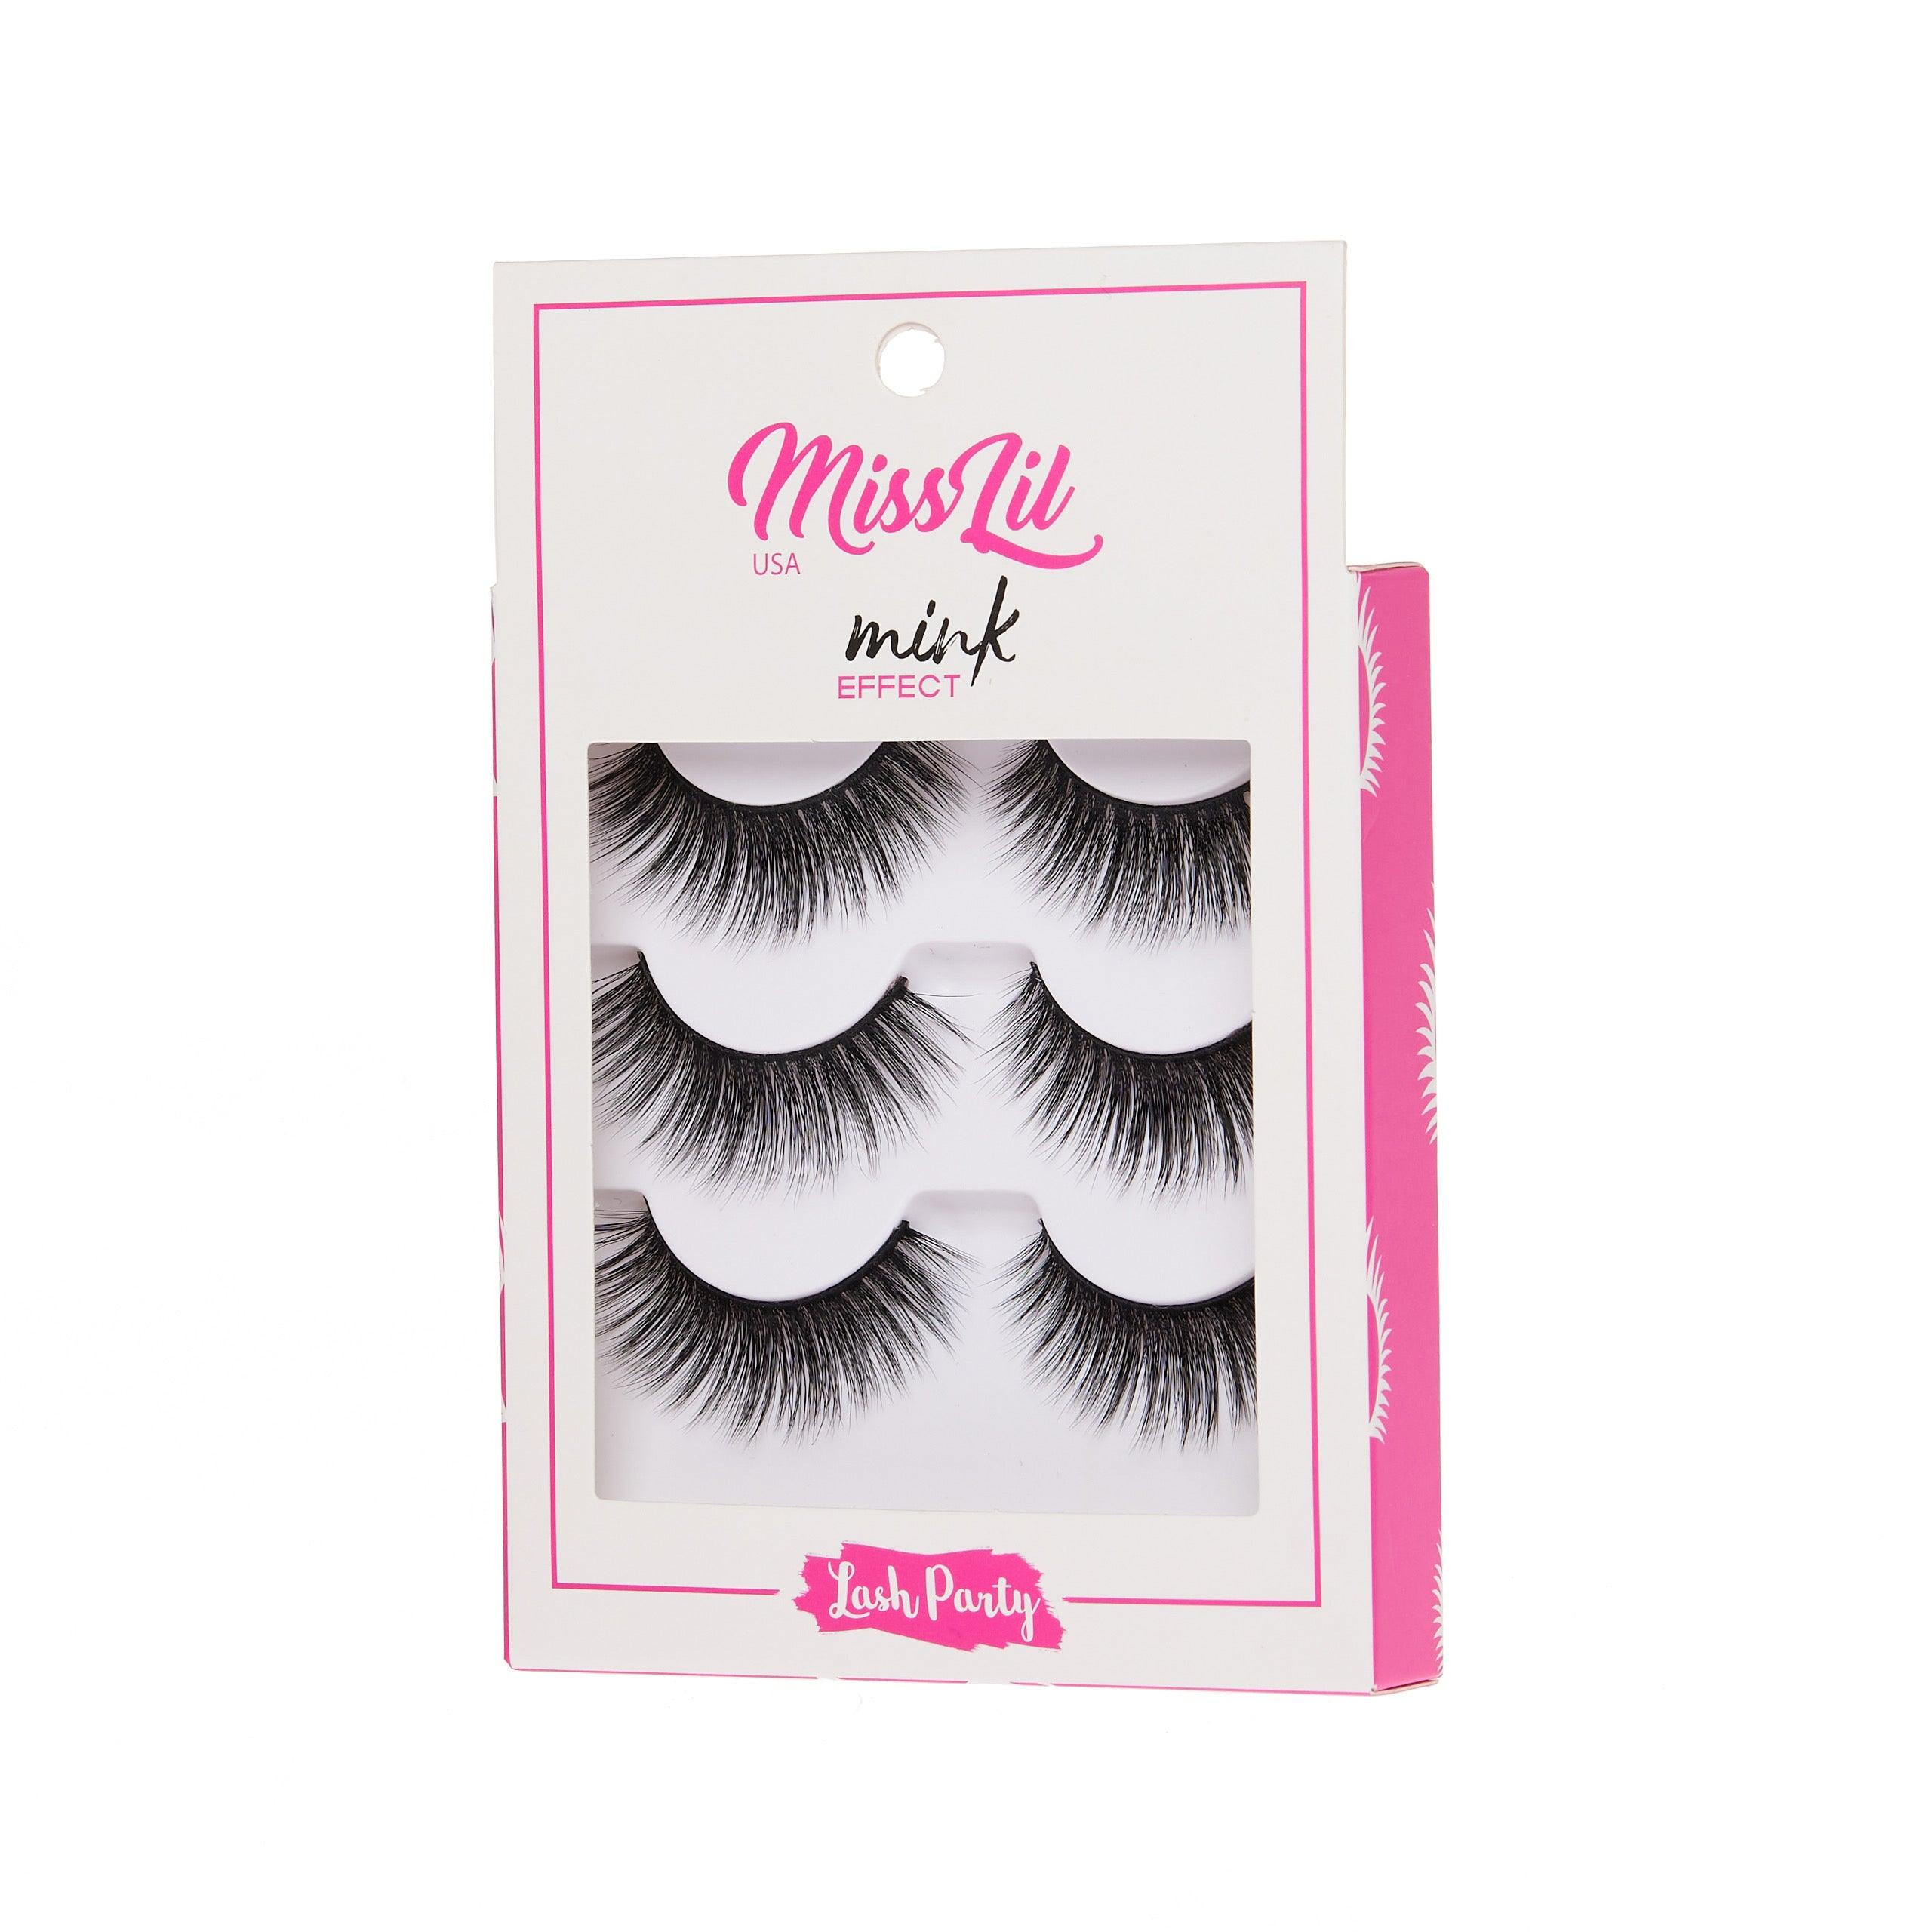 3-Pair Faux Mink Effect Eyelashes - Lash Party Collection #5 - Pack of 3 - Miss Lil USA